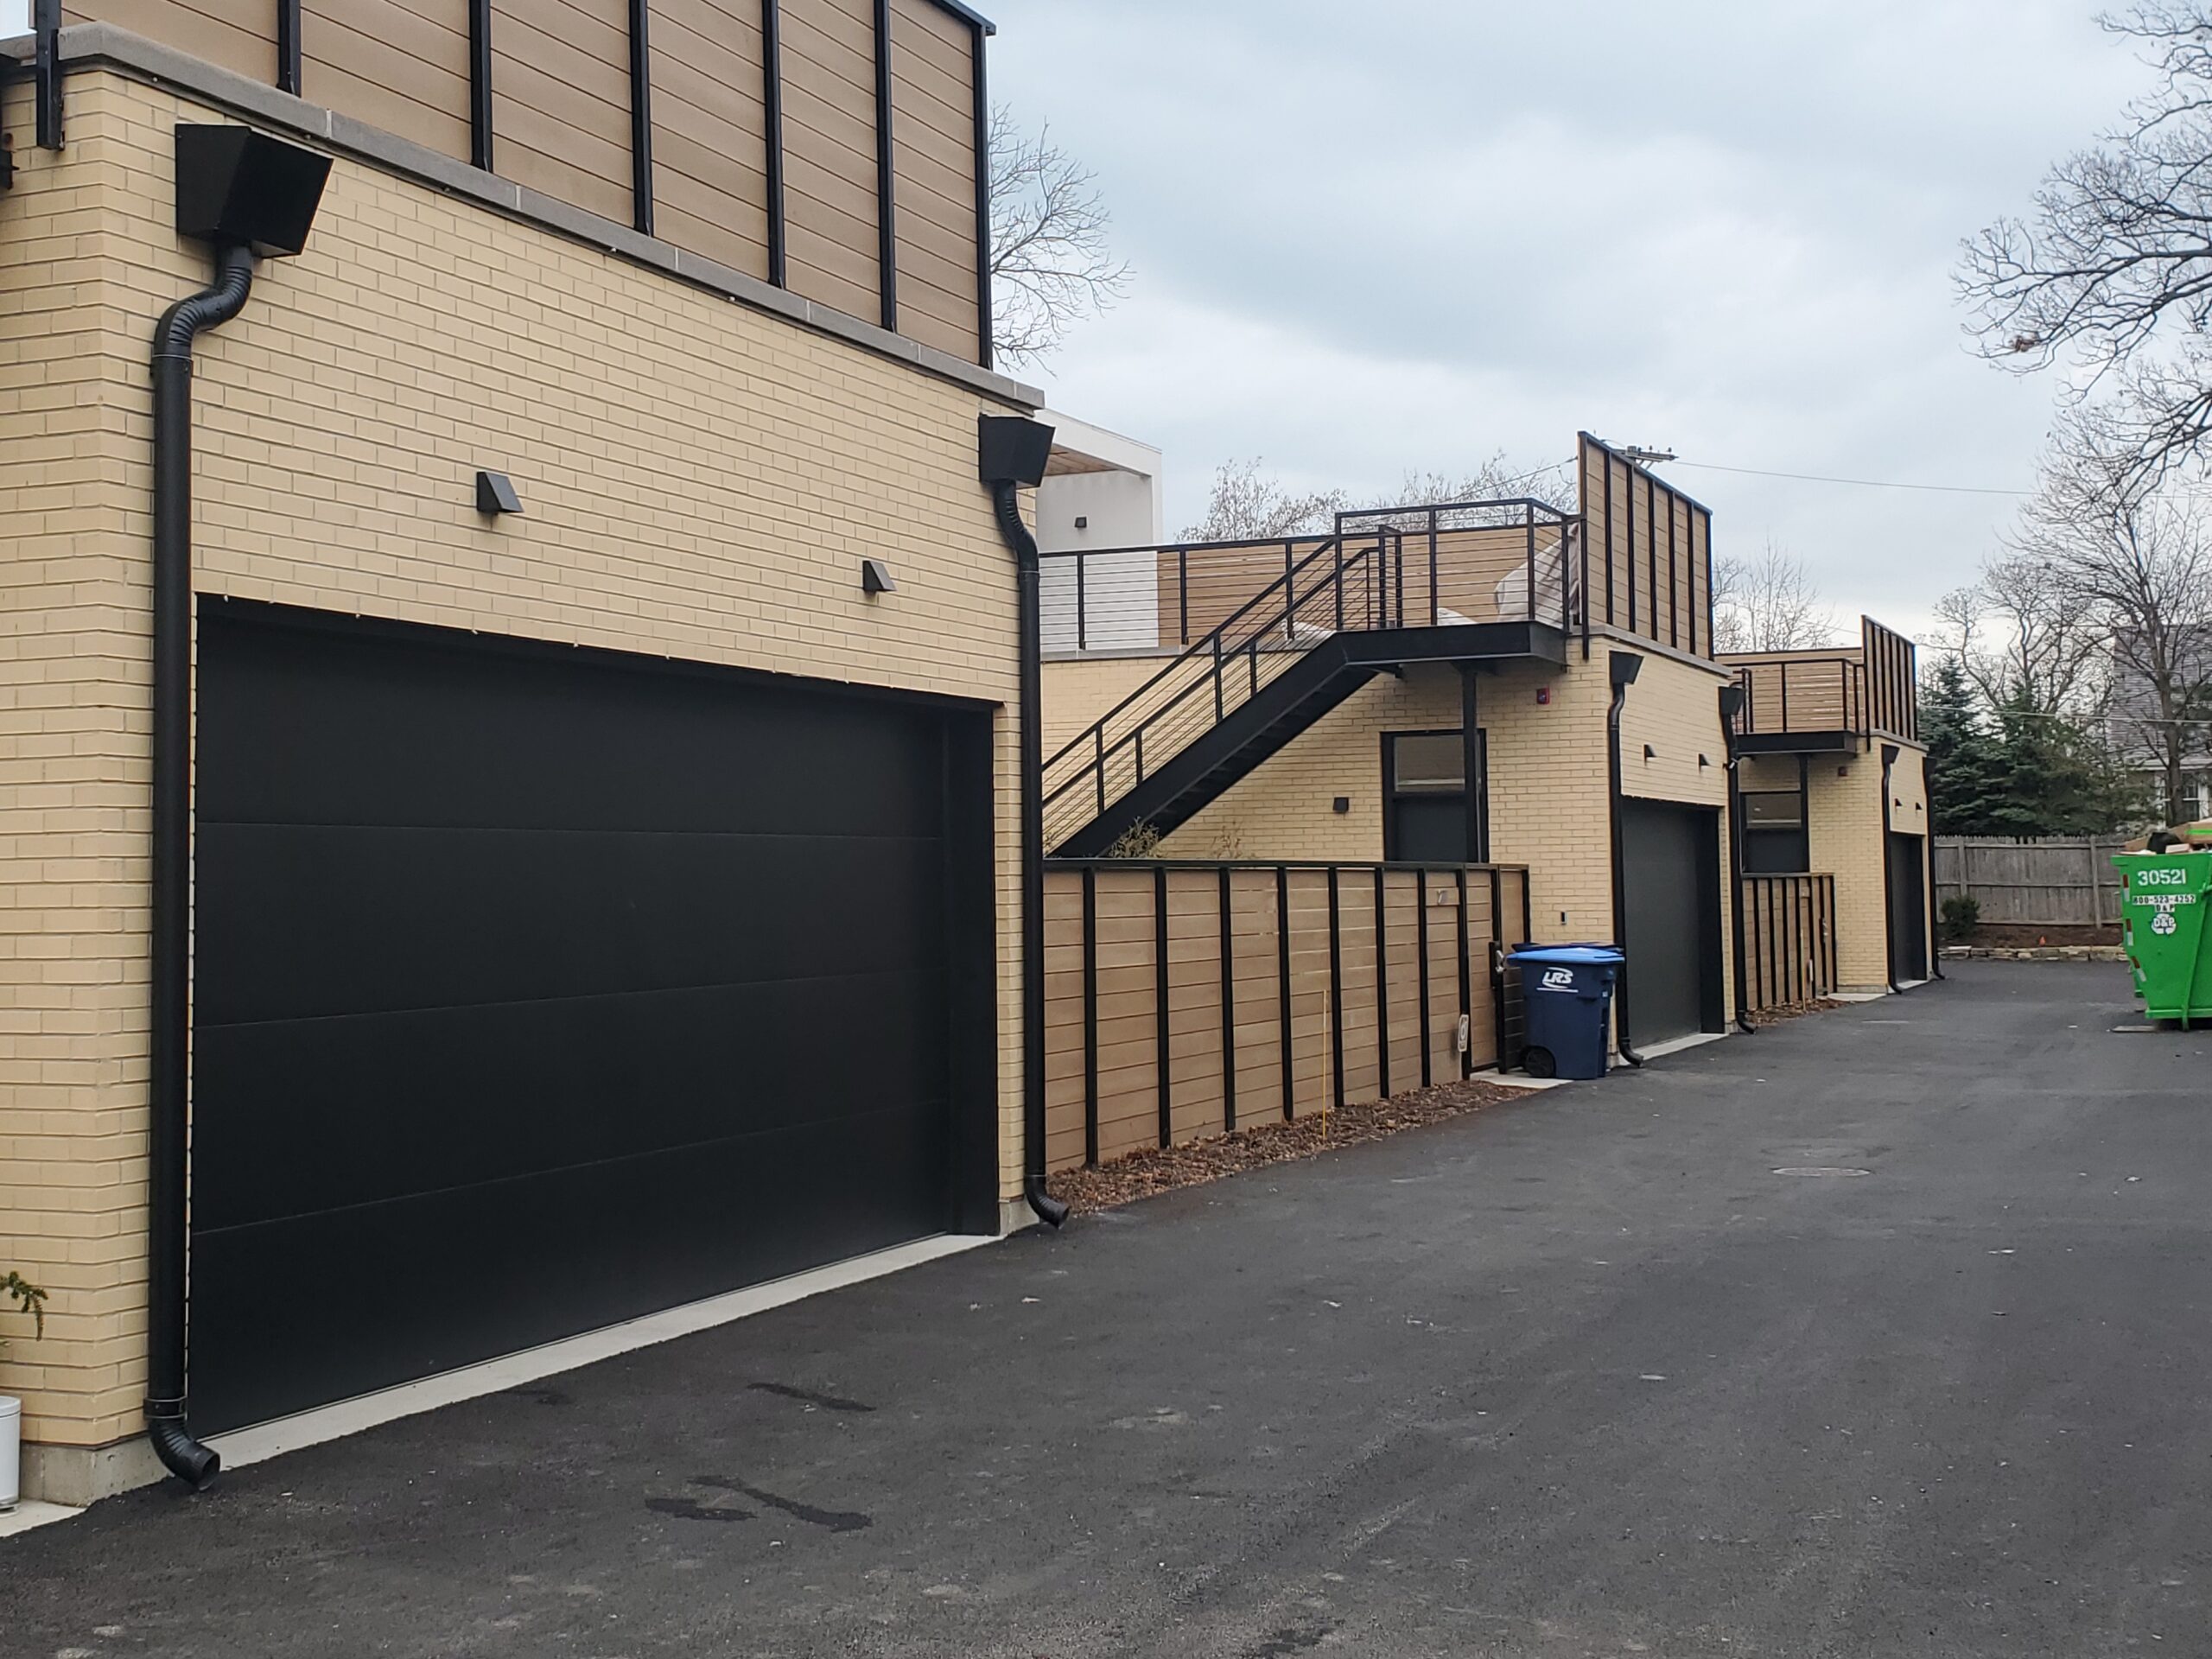 back alley view of St Johns Highland Park apartments that shows tan brick exterior and garage door entrances